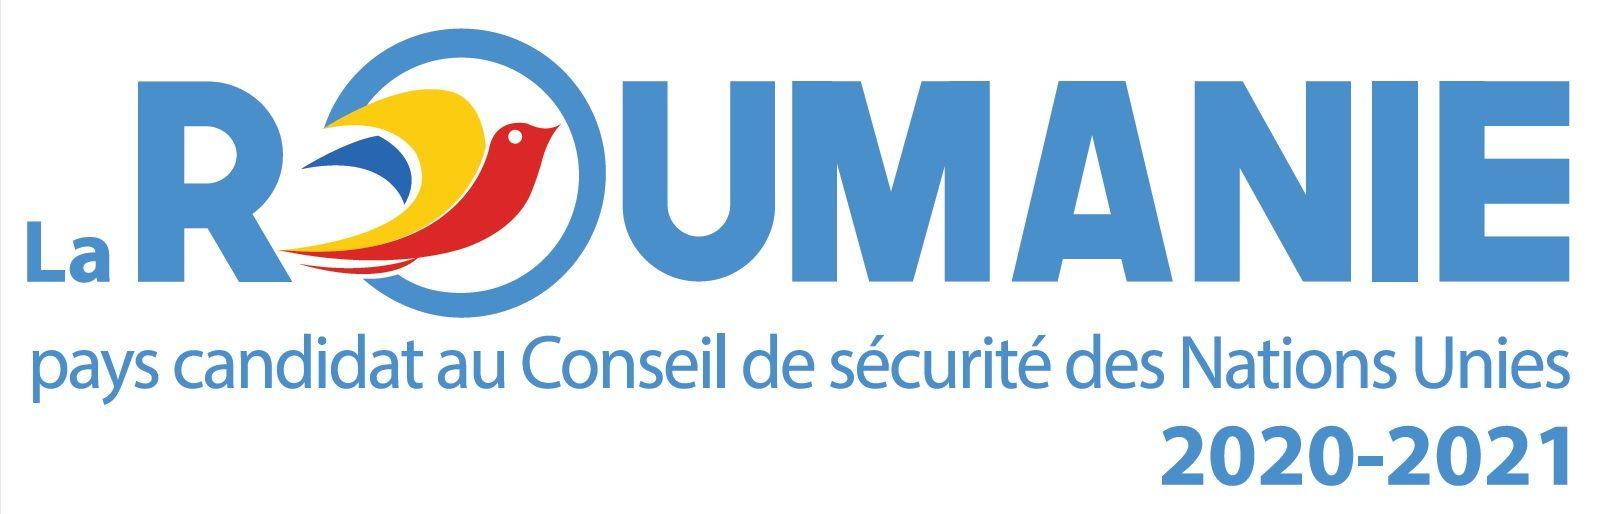 United Nations Security Council Logo - The Candidature Of Romania To A Non Permanent Seat In The United